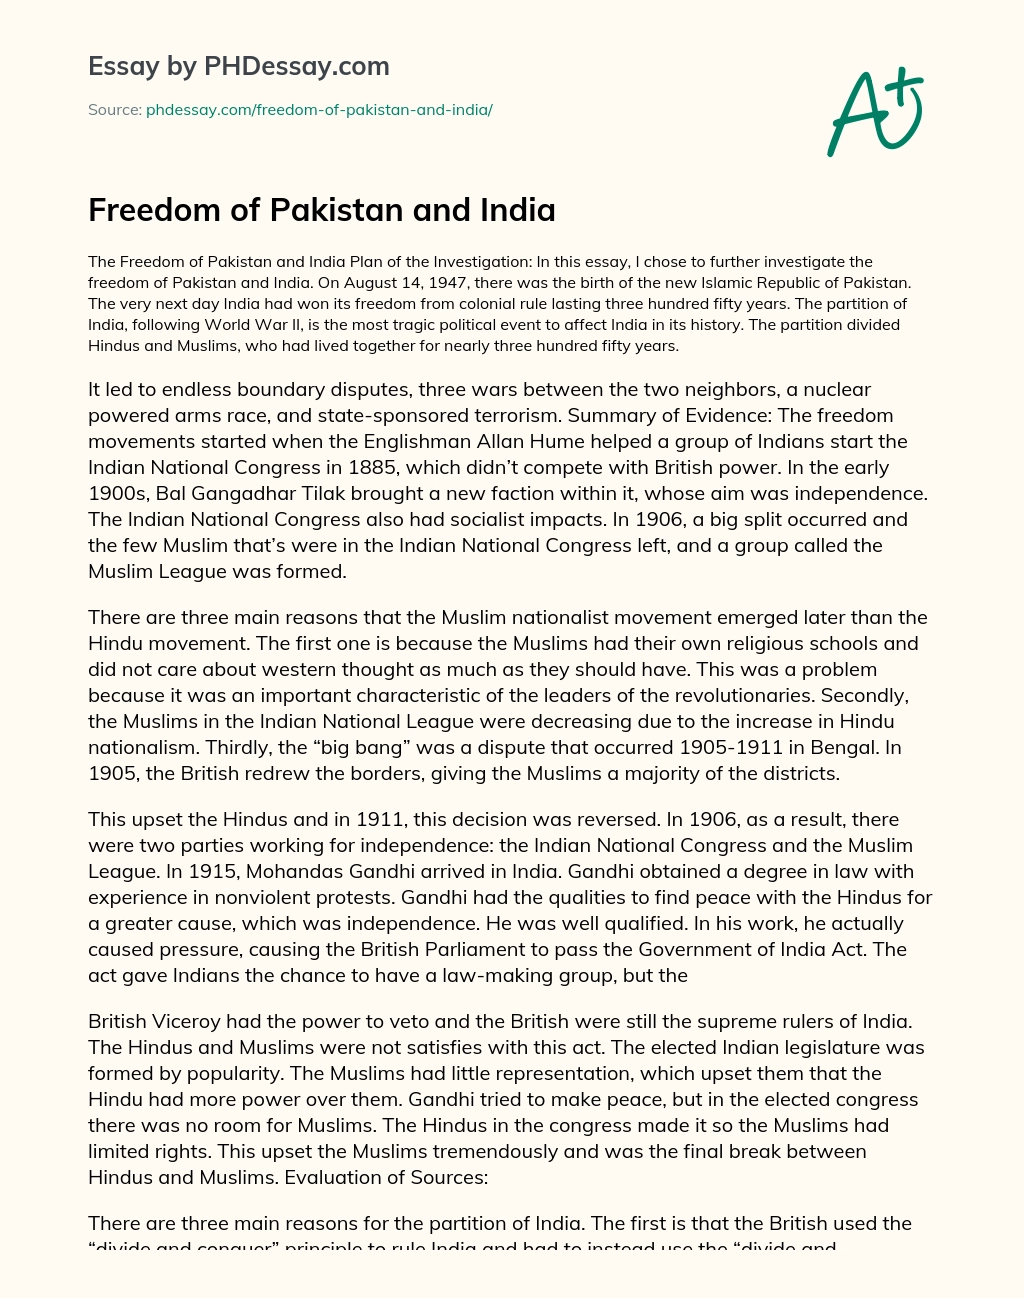 Freedom of Pakistan and India essay